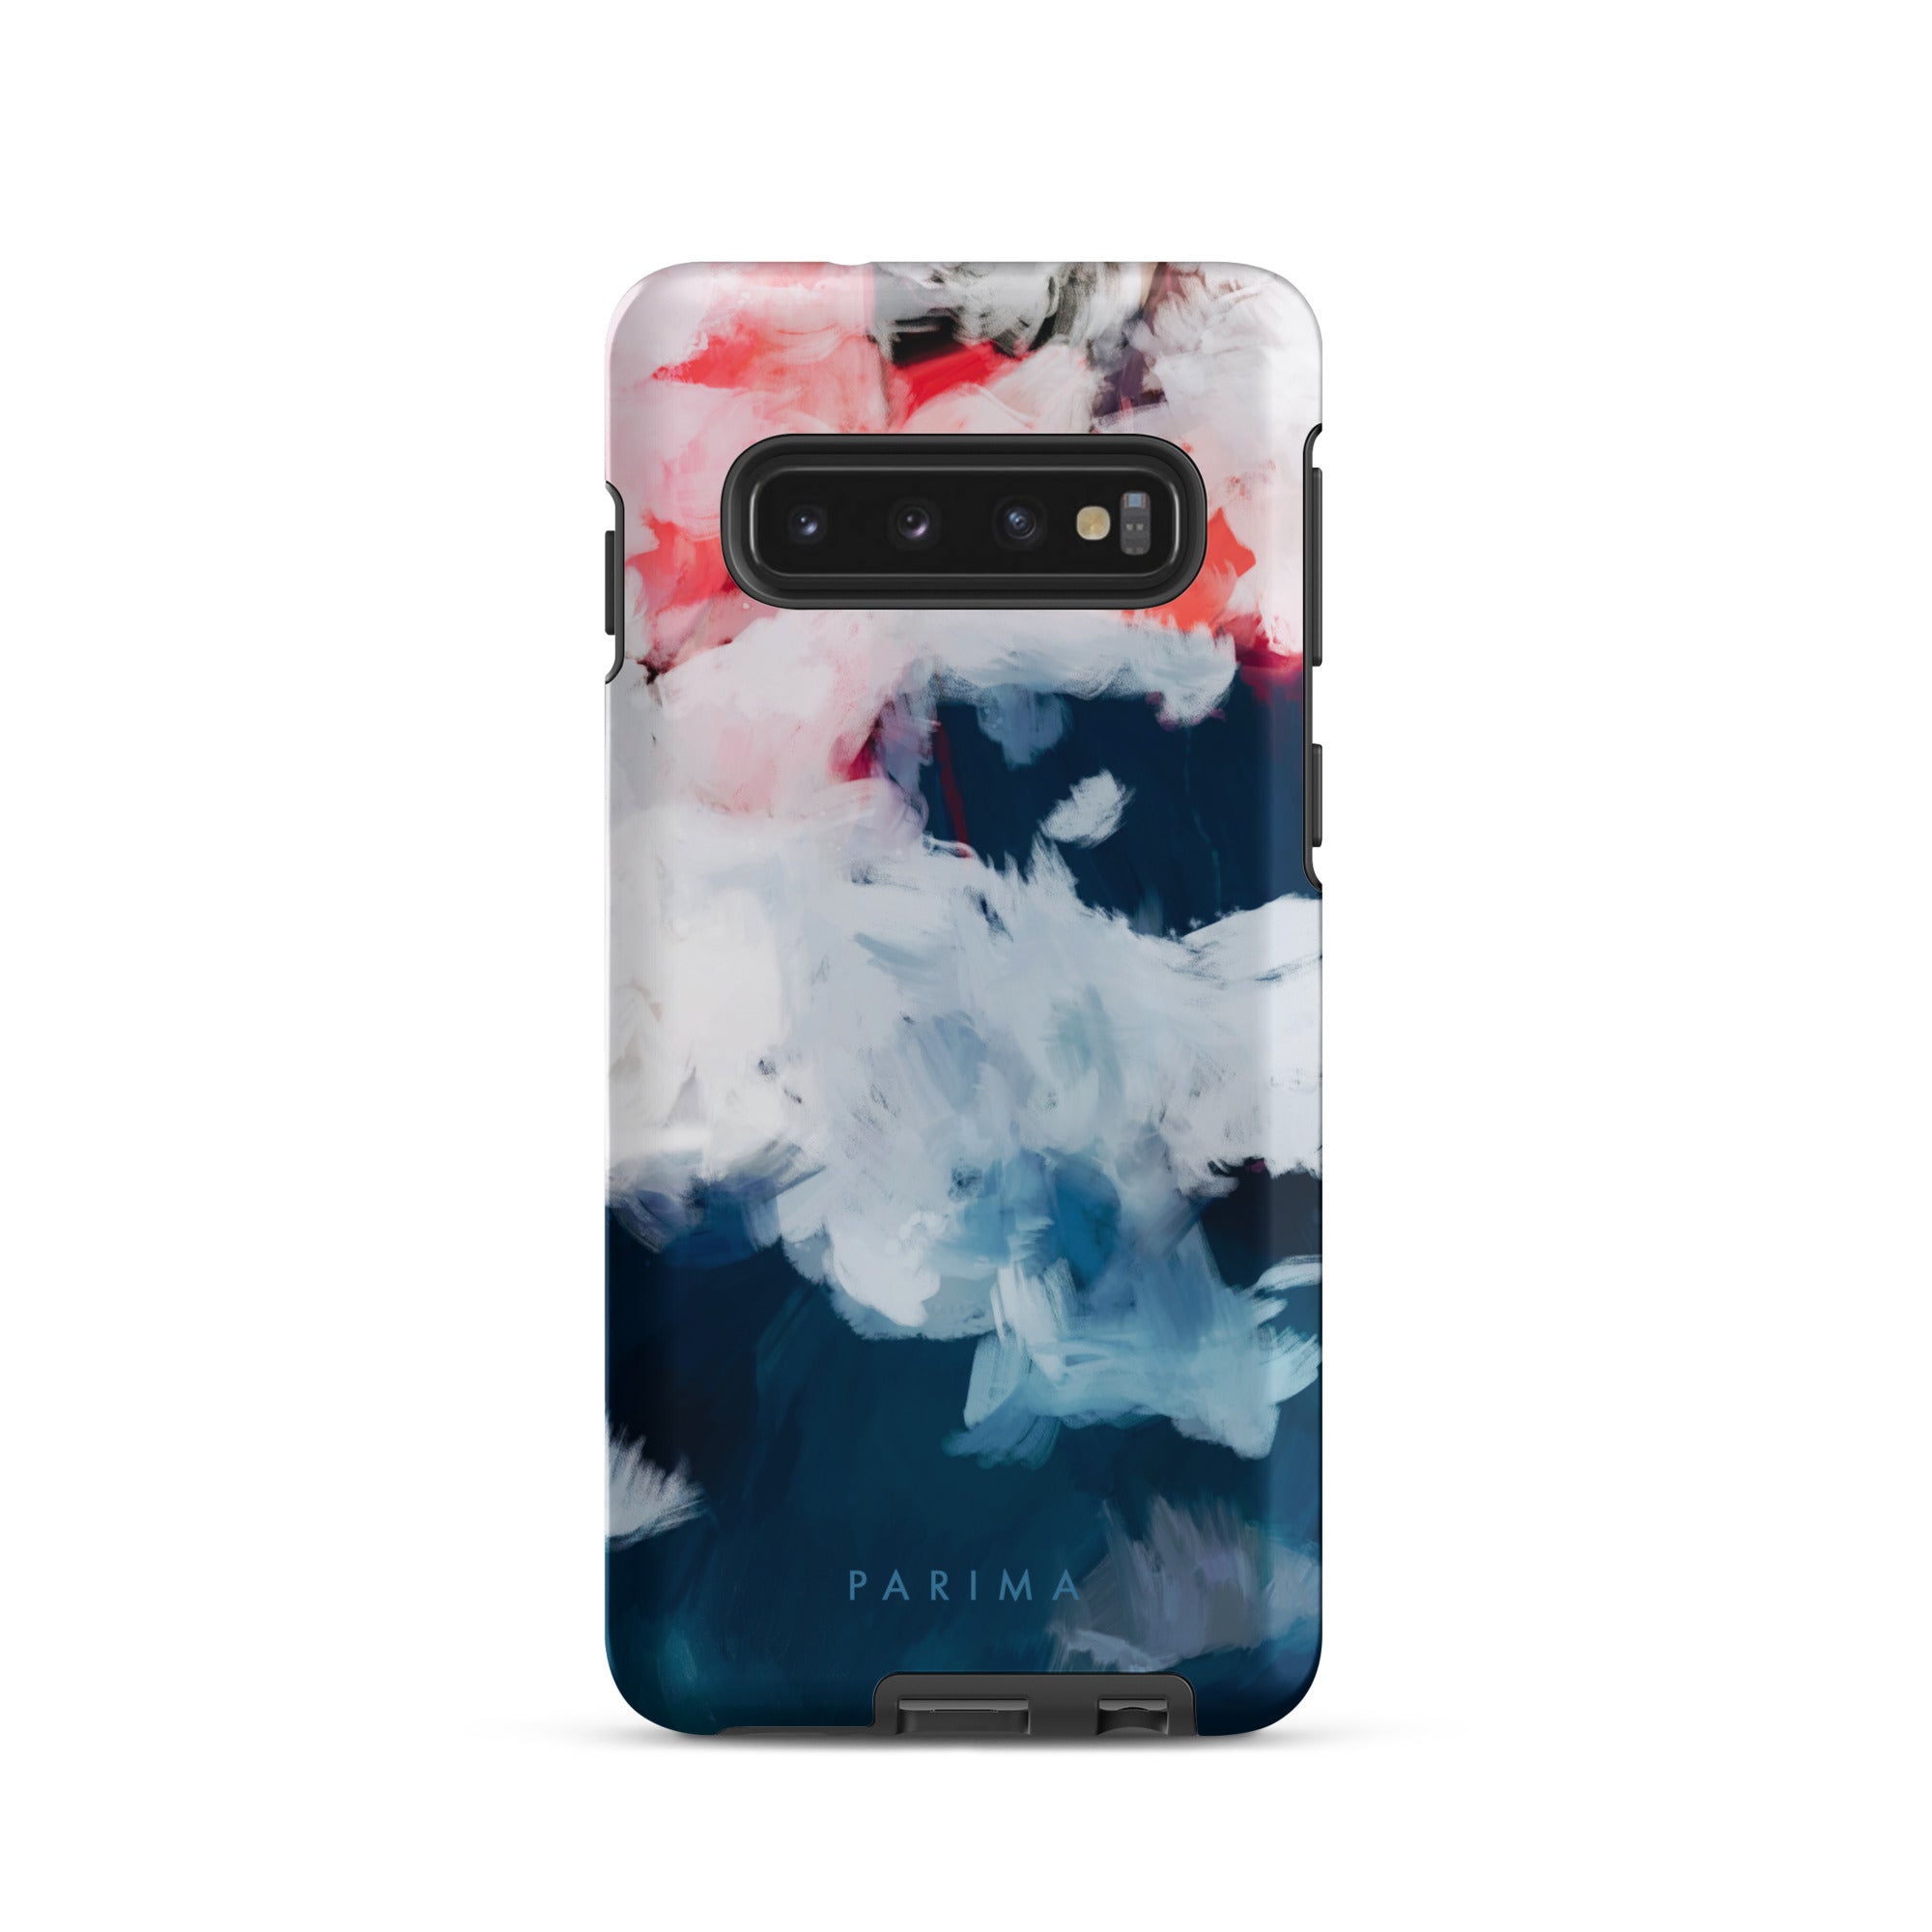 Oceane, blue and pink abstract art on Samsung Galaxy S10 tough case by Parima Studio